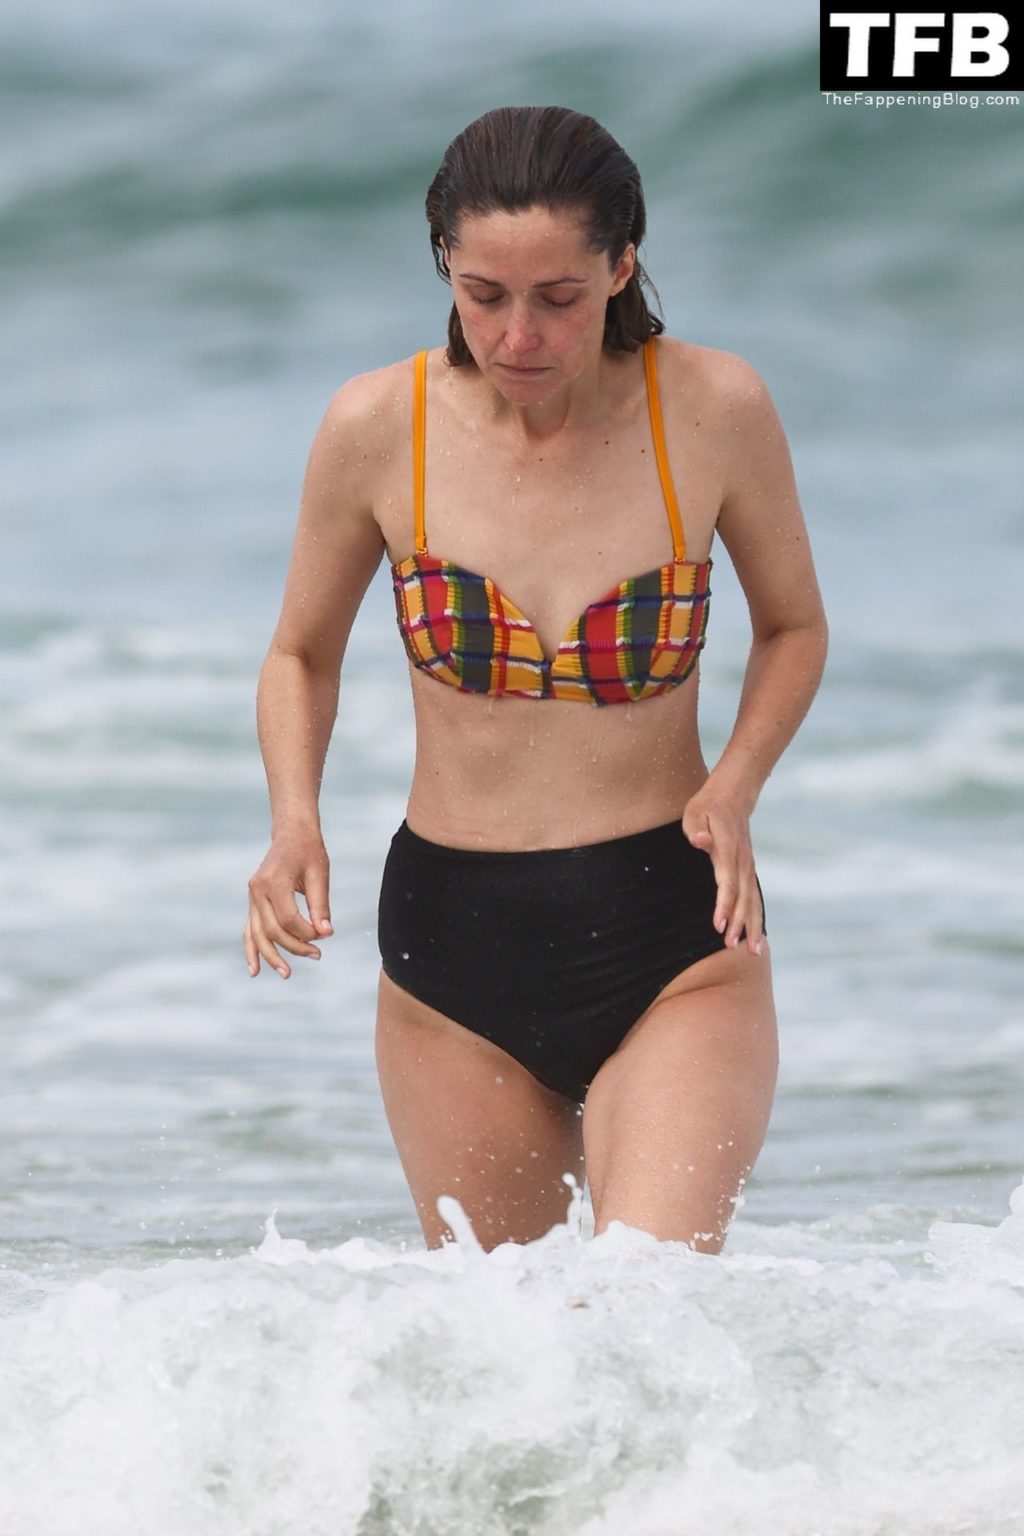 Rose Byrne Sexy The Fappening Blog 56 1024x1536 - Rose Byrne & Kick Gurry Enjoy a Day on the Beach in Sydney (90 Photos)